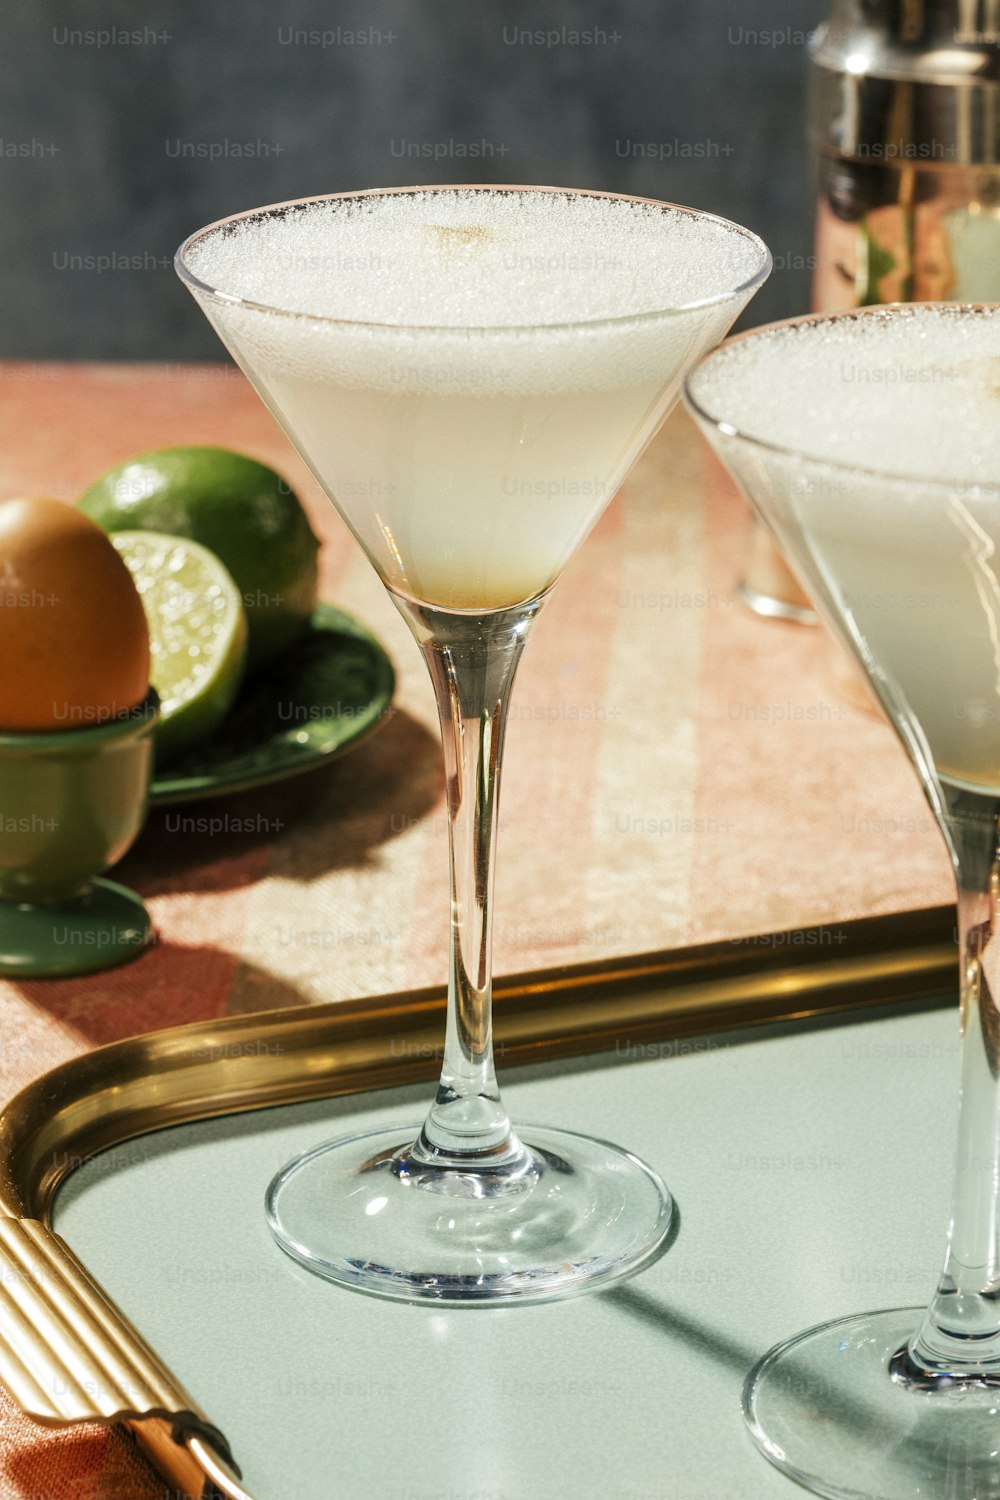 Pisco Sour, a cocktail with Pisco, lime or lemon juice, egg white, and amargo chungo or angostura, in luxury contemporary style.